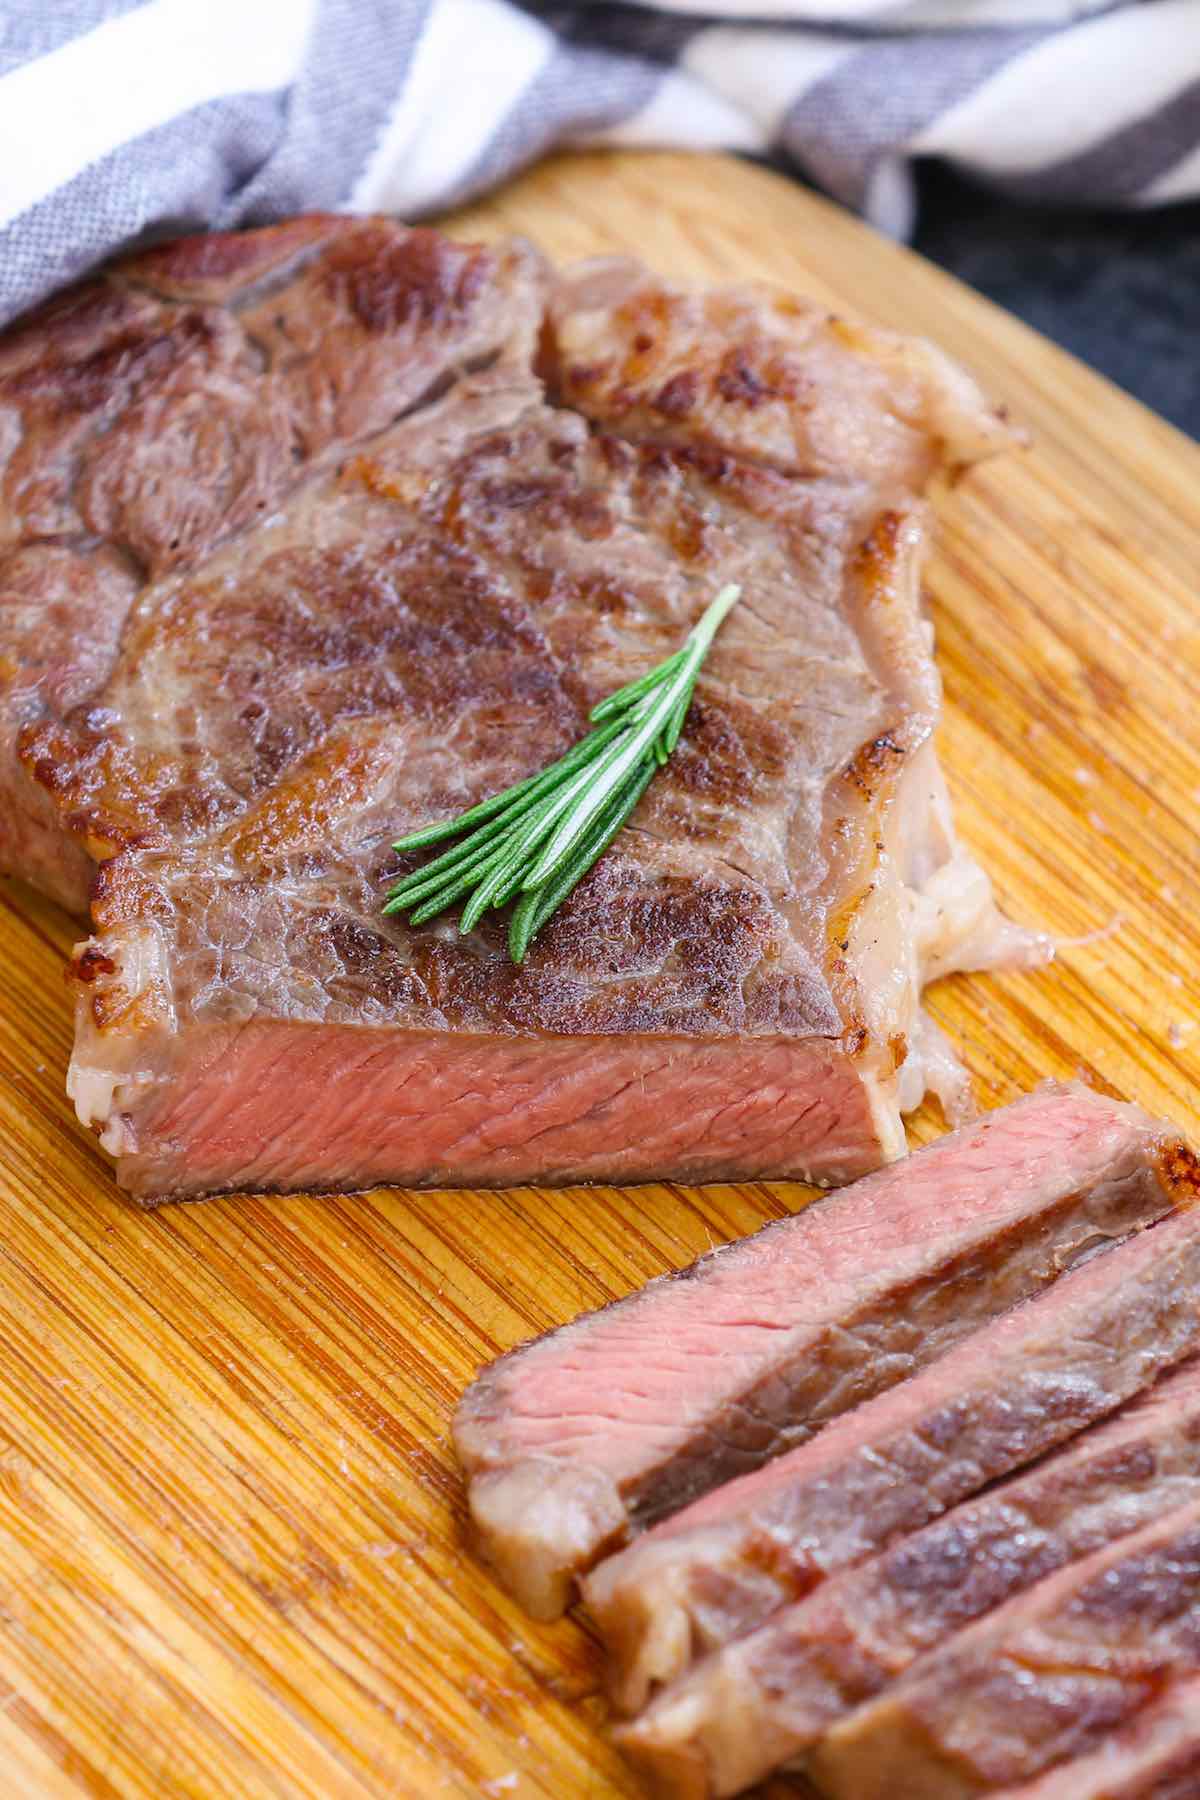 Sliced New York strip steak that has been pan seared to medium doneness and garnished with fresh rosemary